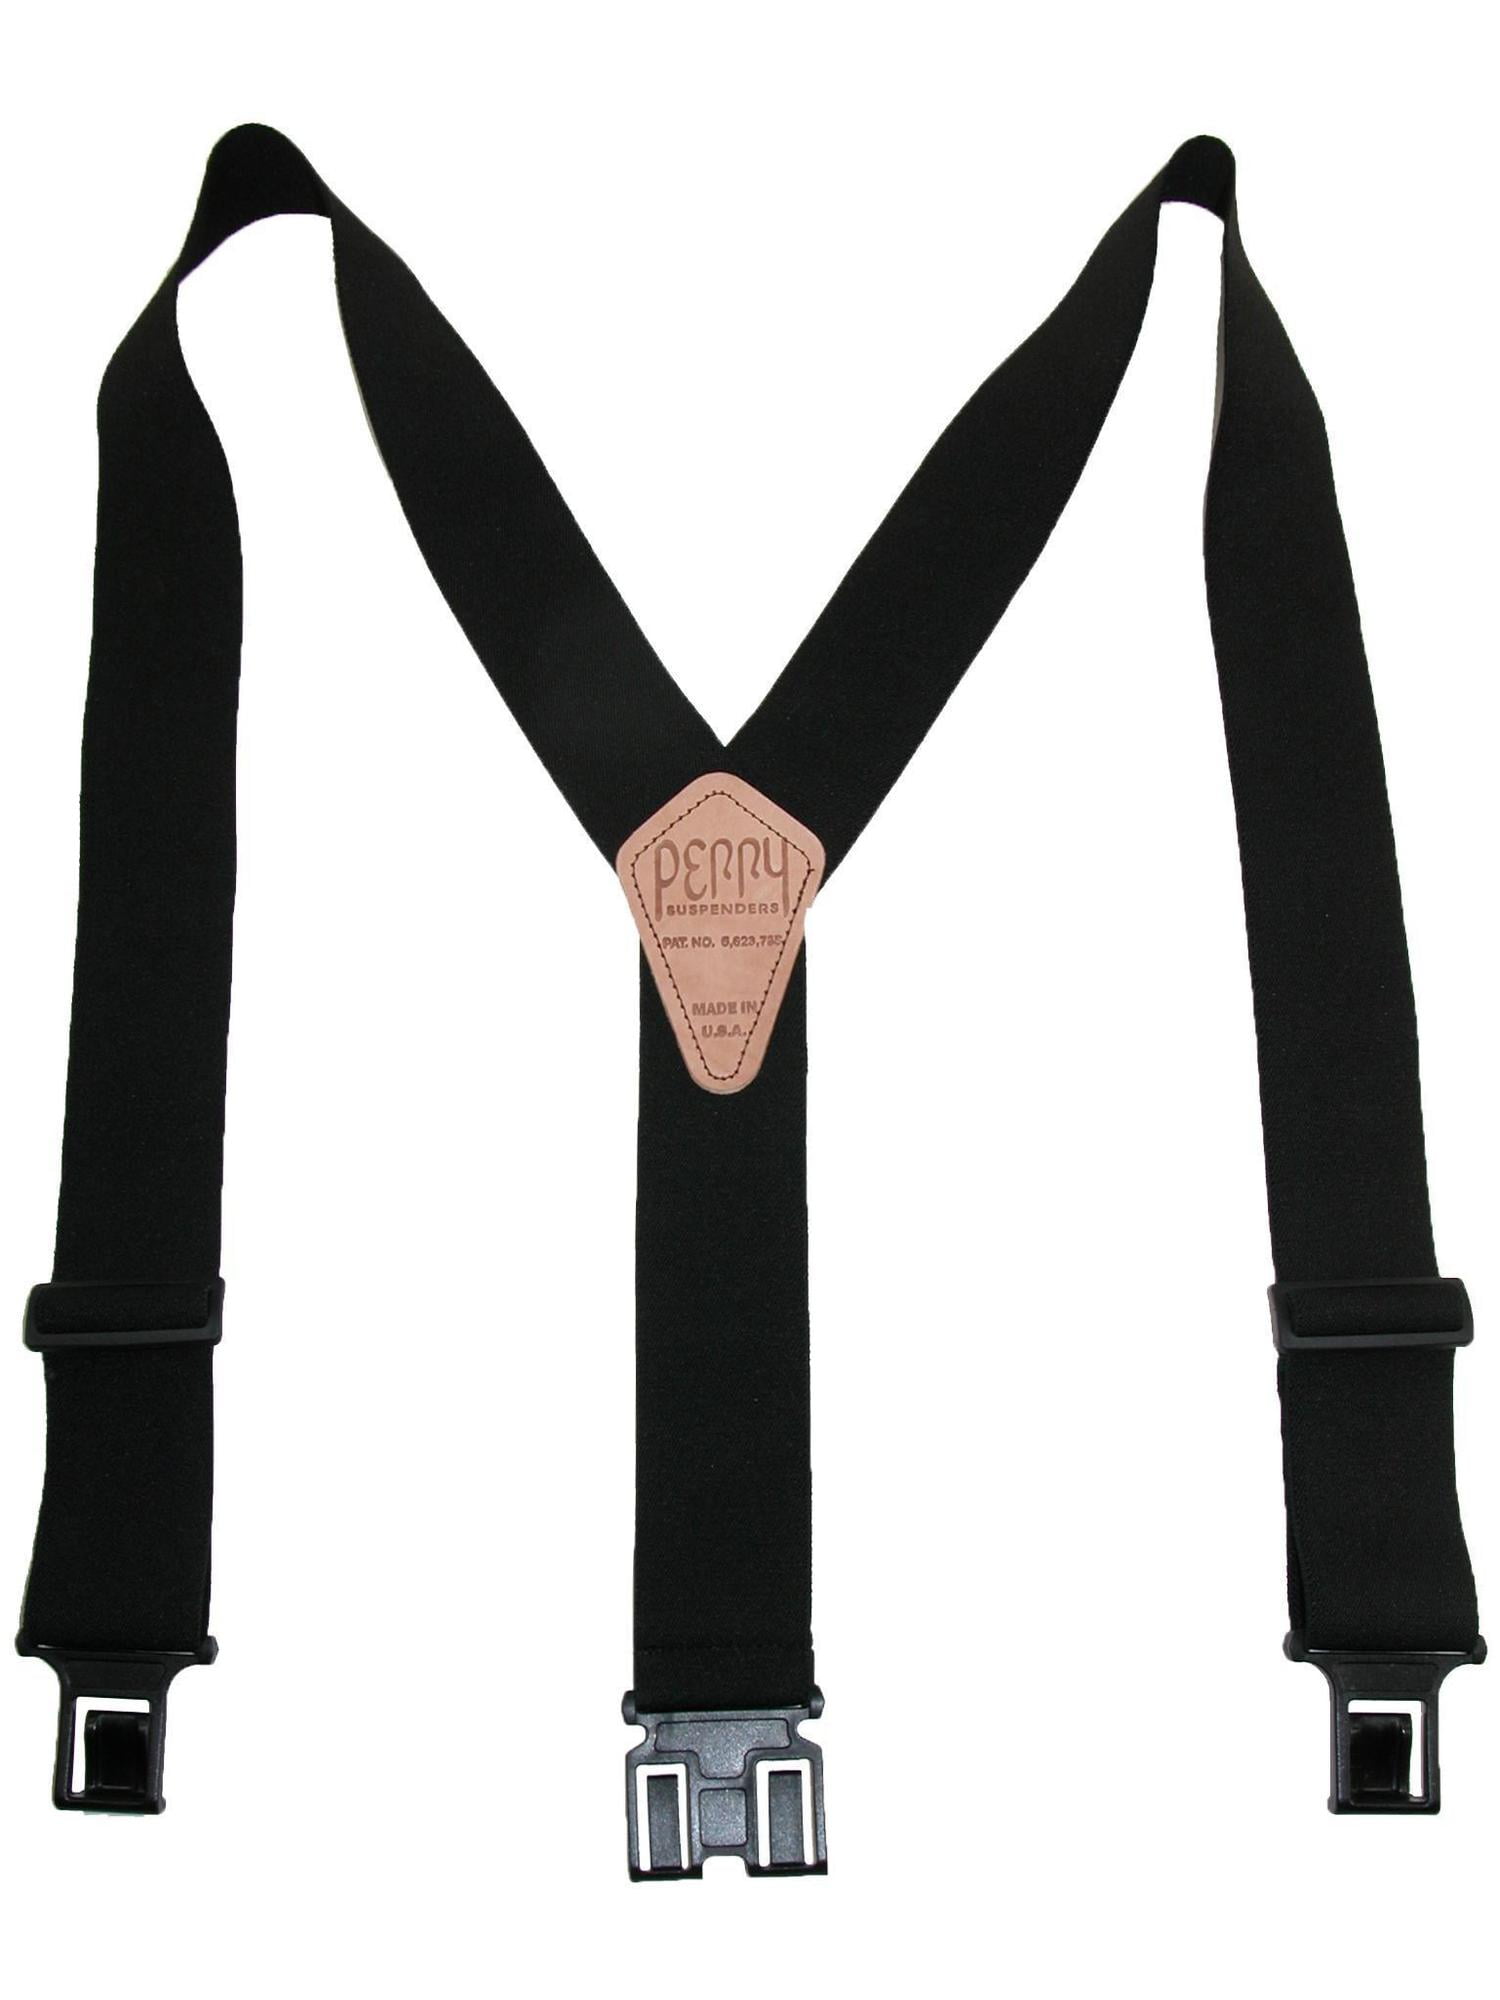 Medline Standard Back Support with Suspenders Black Small 25 - 30